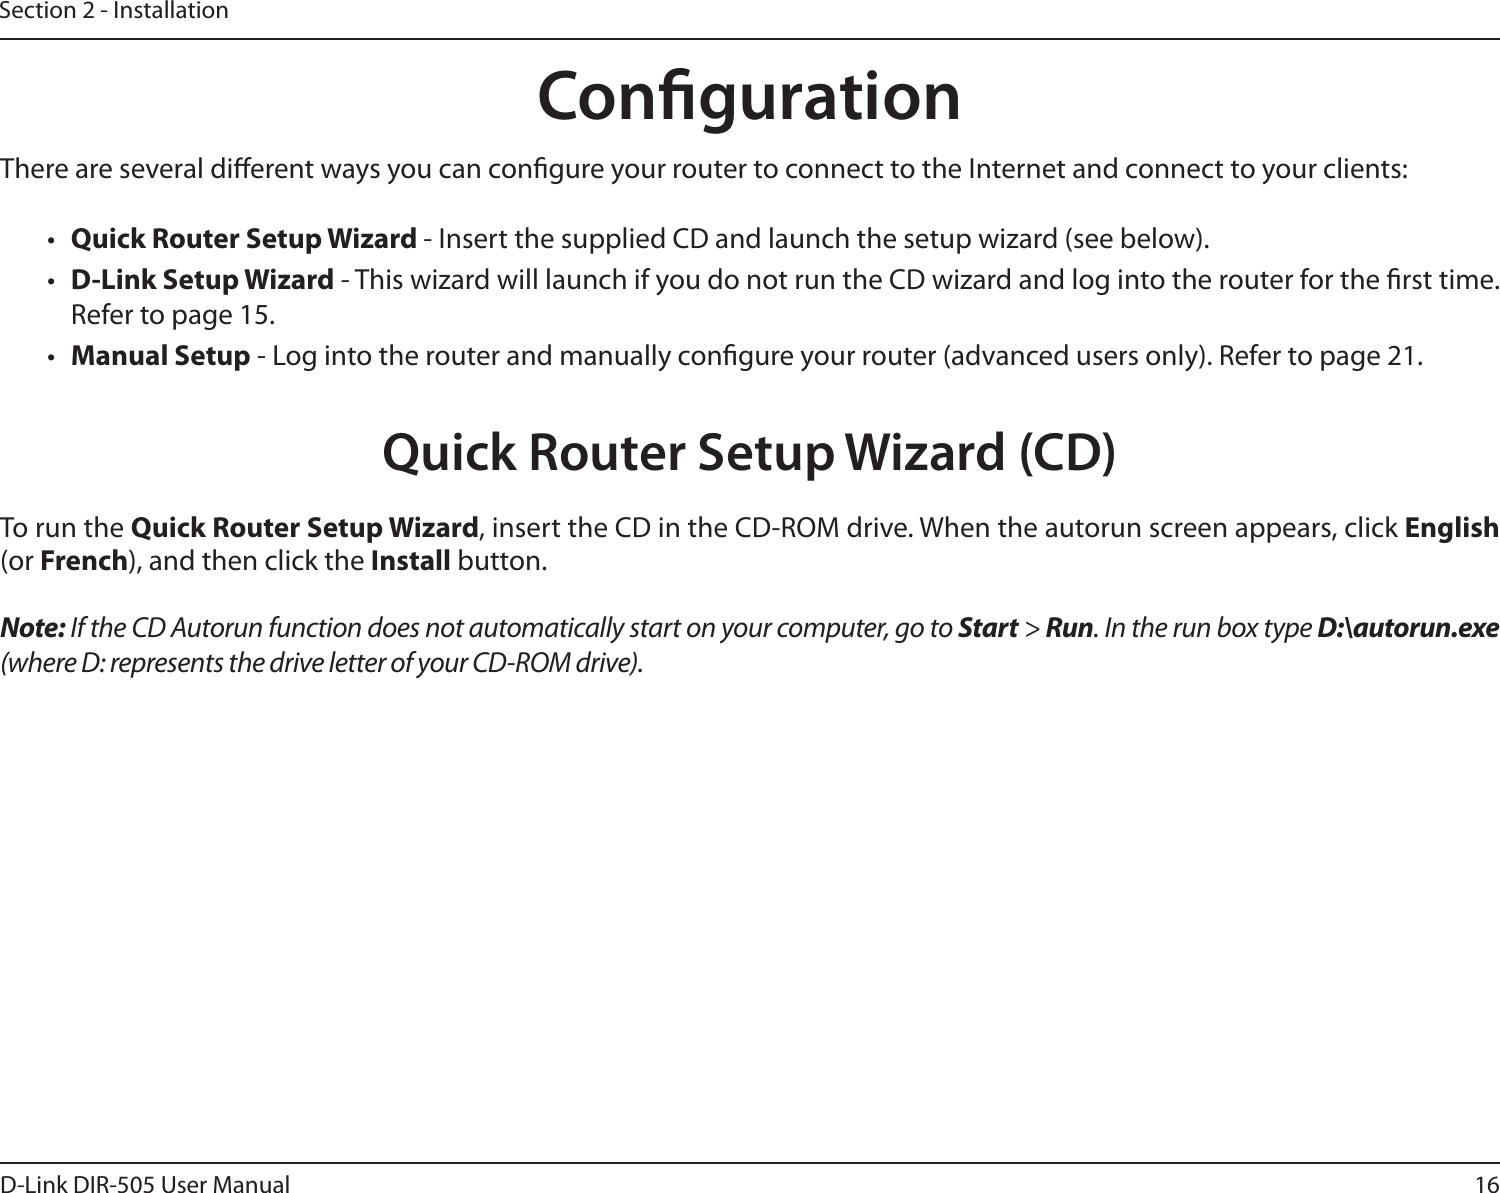 16D-Link DIR-505 User ManualSection 2 - InstallationThere are several dierent ways you can congure your router to connect to the Internet and connect to your clients:•  Quick Router Setup Wizard - Insert the supplied CD and launch the setup wizard (see below).•  D-Link Setup Wizard - This wizard will launch if you do not run the CD wizard and log into the router for the rst time. Refer to page 15.•  Manual Setup - Log into the router and manually congure your router (advanced users only). Refer to page 21.To run the Quick Router Setup Wizard, insert the CD in the CD-ROM drive. When the autorun screen appears, click English (or French), and then click the Install button.Note: If the CD Autorun function does not automatically start on your computer, go to Start &gt; Run. In the run box type D:\autorun.exe (where D: represents the drive letter of your CD-ROM drive).CongurationQuick Router Setup Wizard (CD)